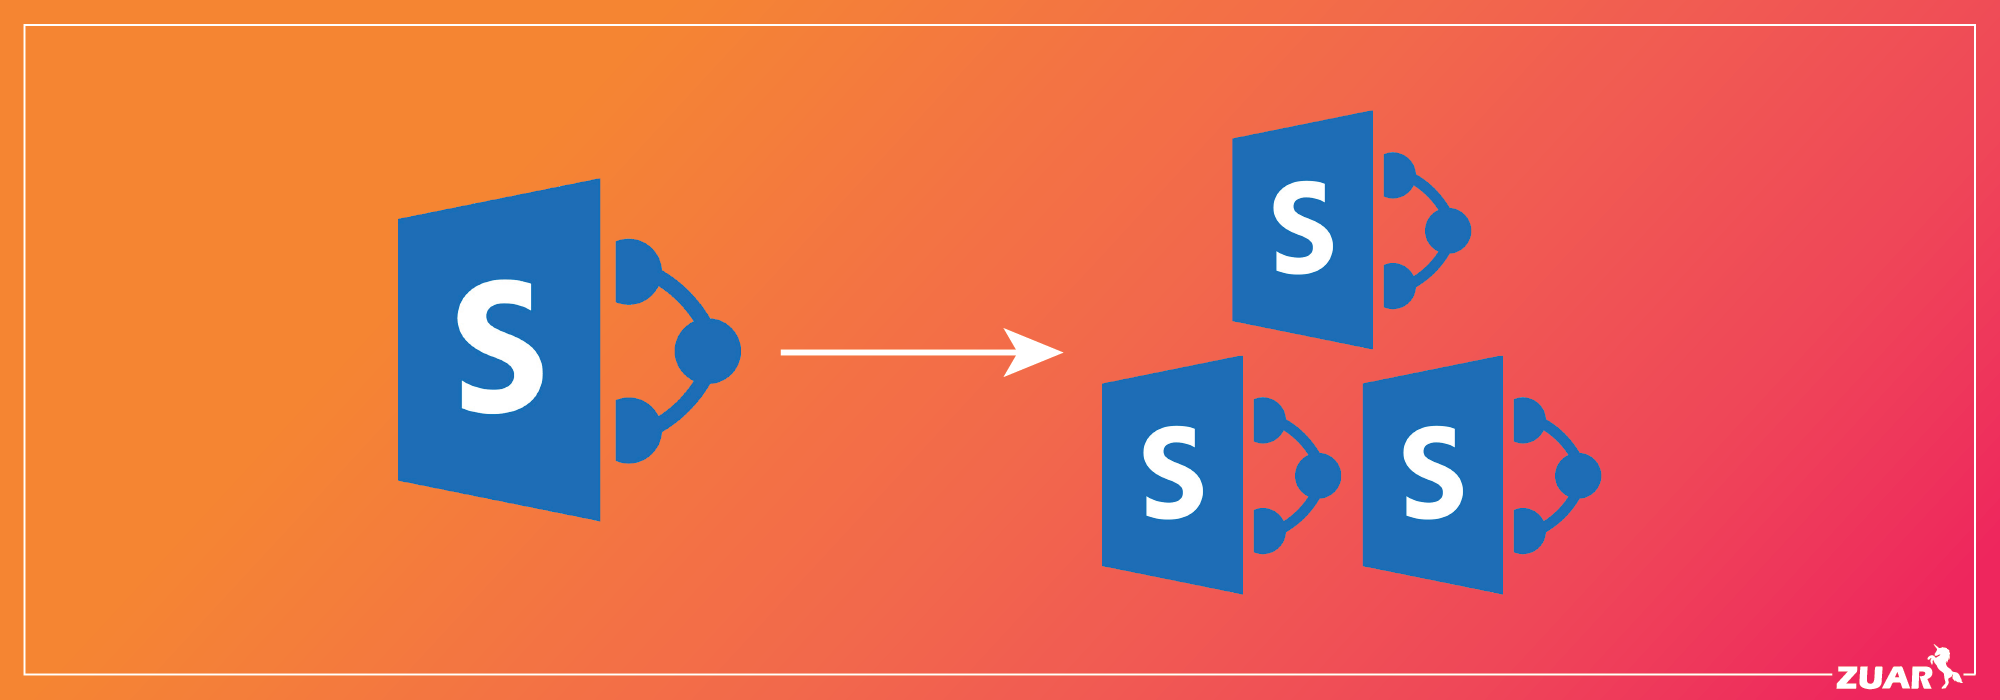 Rclone OneDrive and SharePoint integration